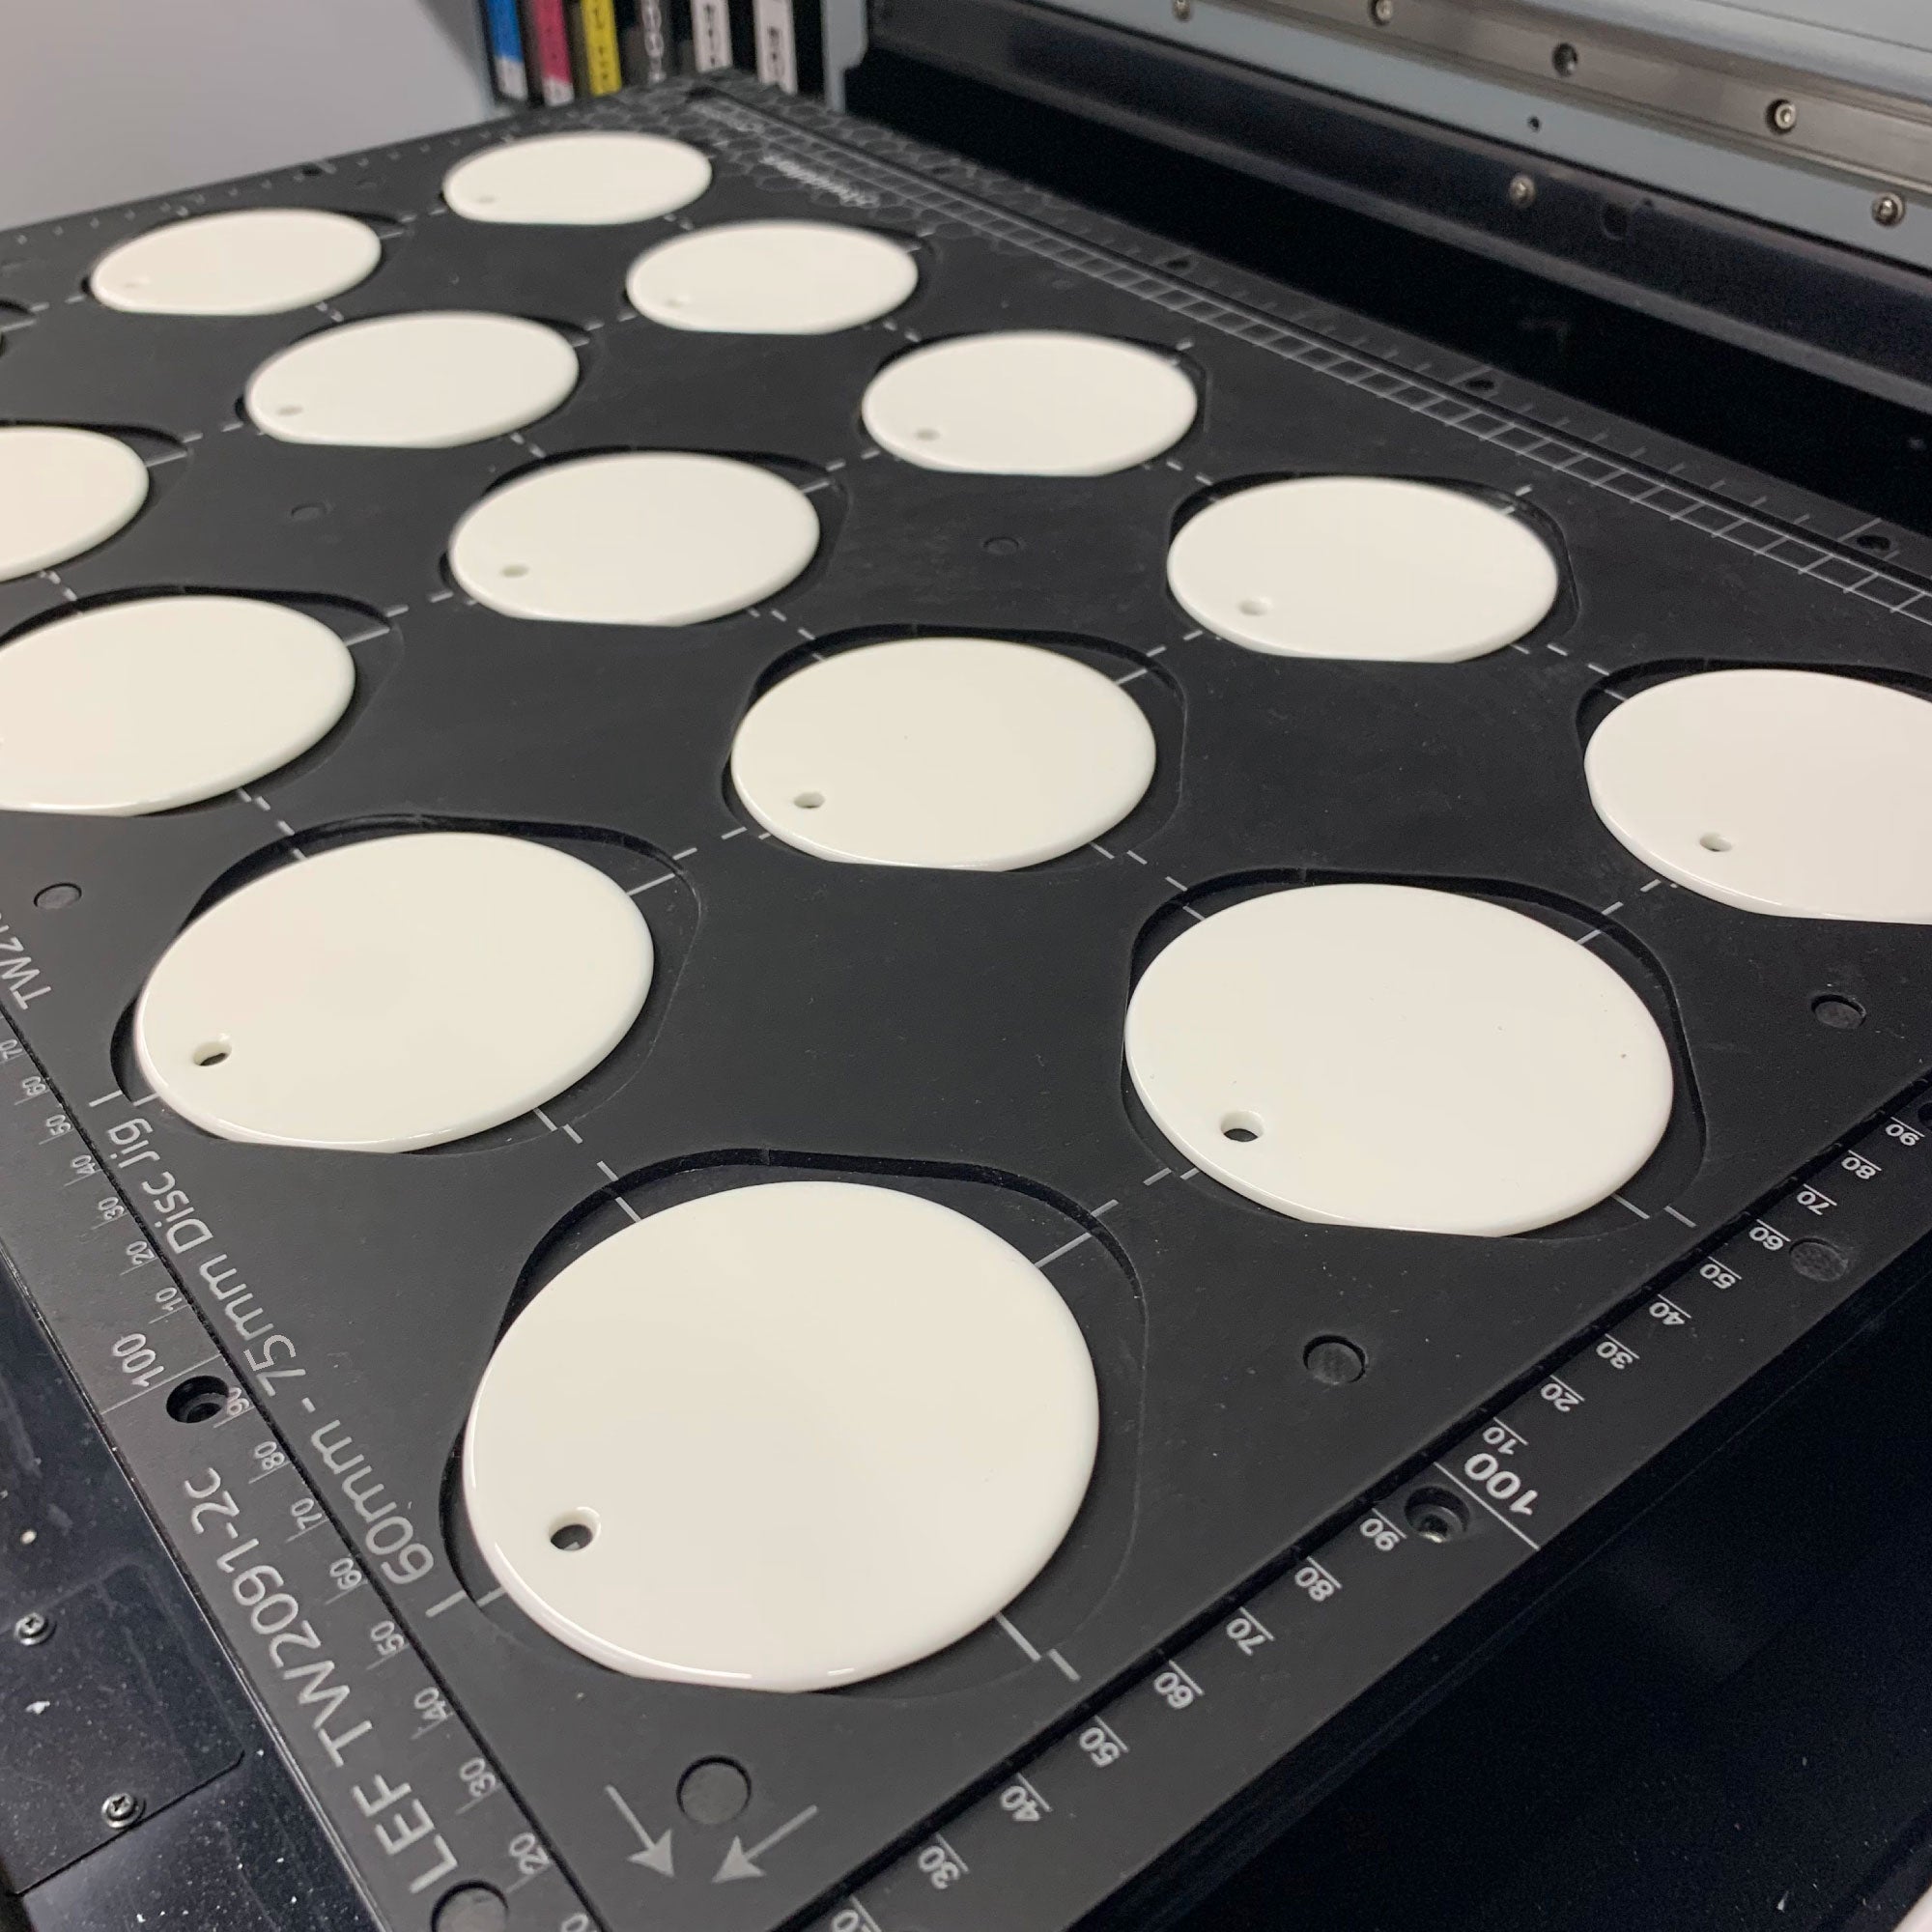 Ceramic Christmas Bauble Printing Jig for Roland LEF 300 Flatbed Printer Series: 60mm - 77mm Circular Discs (24 Spaces)